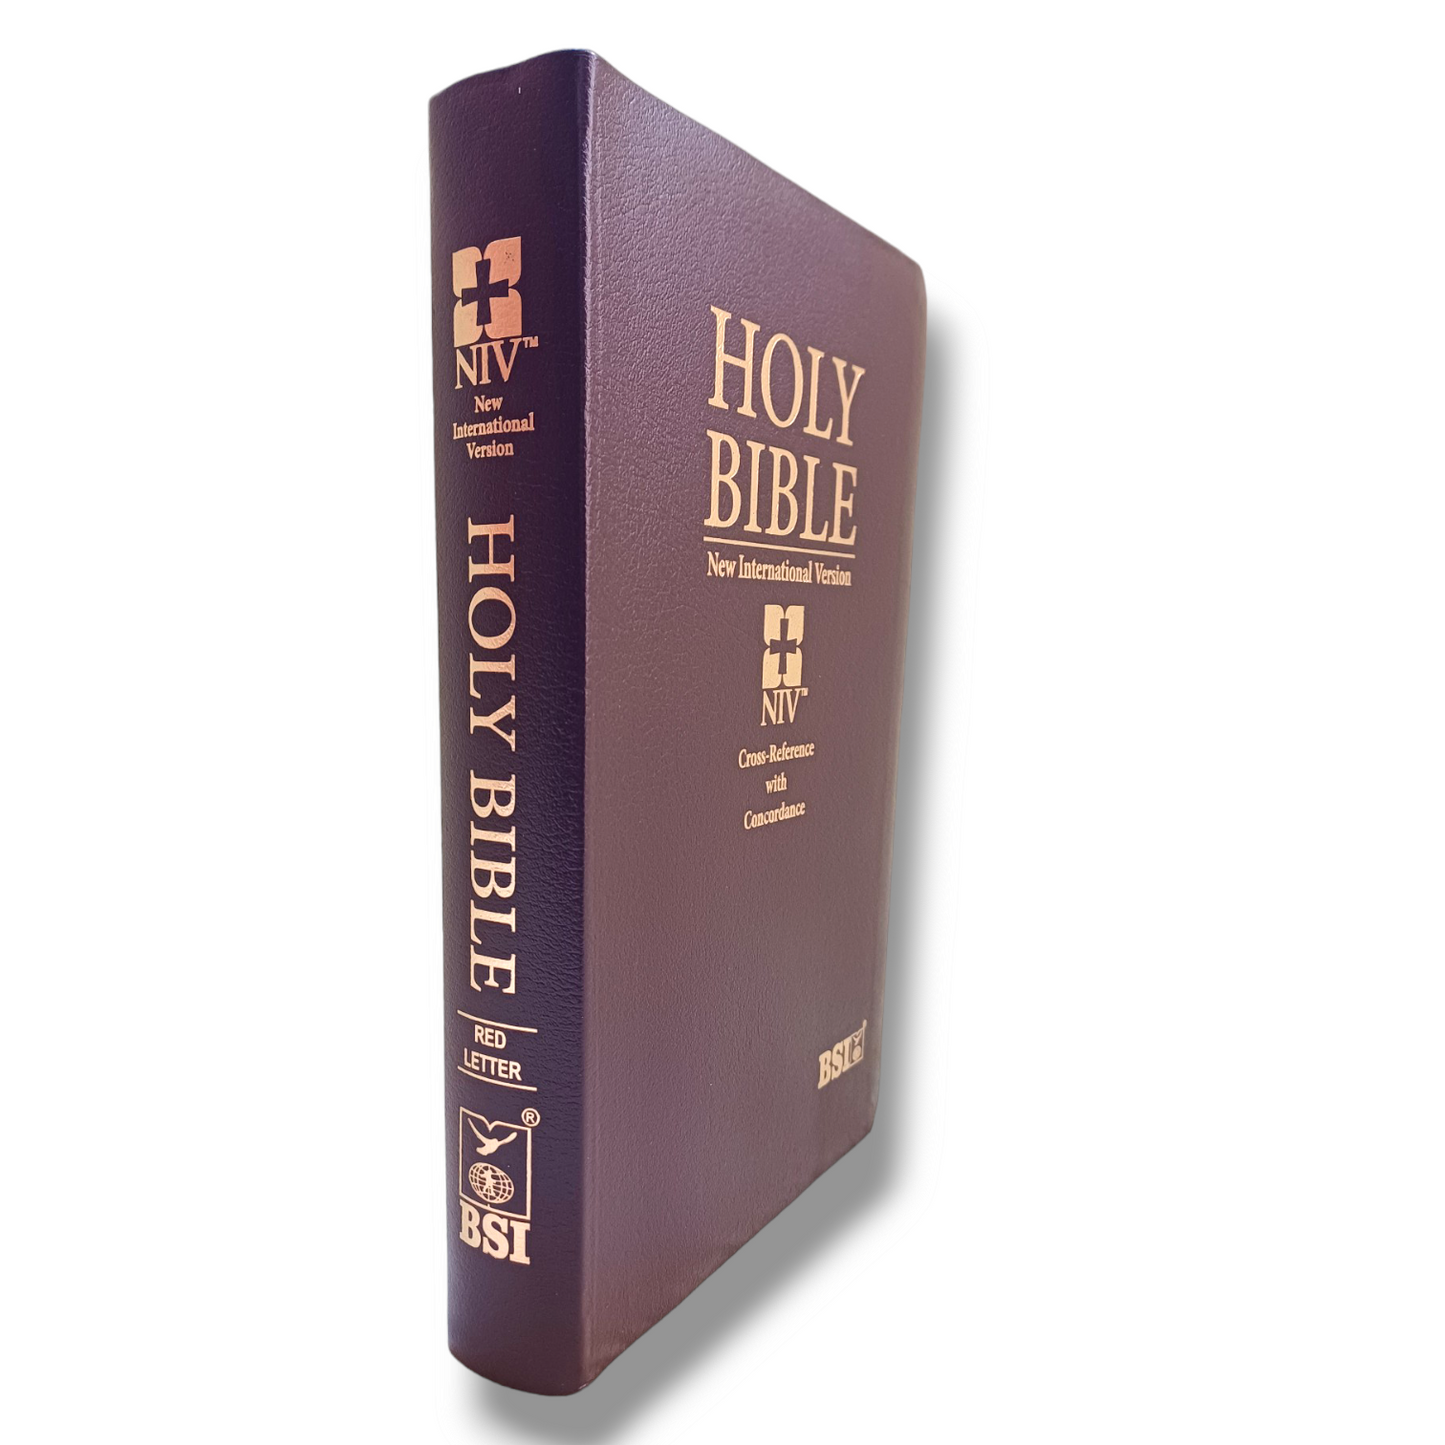 NIV Cross-Reference With Concordance Bible | Brown Leather Bound Edition | Thumb Index Bible | Medium Size Bible | New Edition